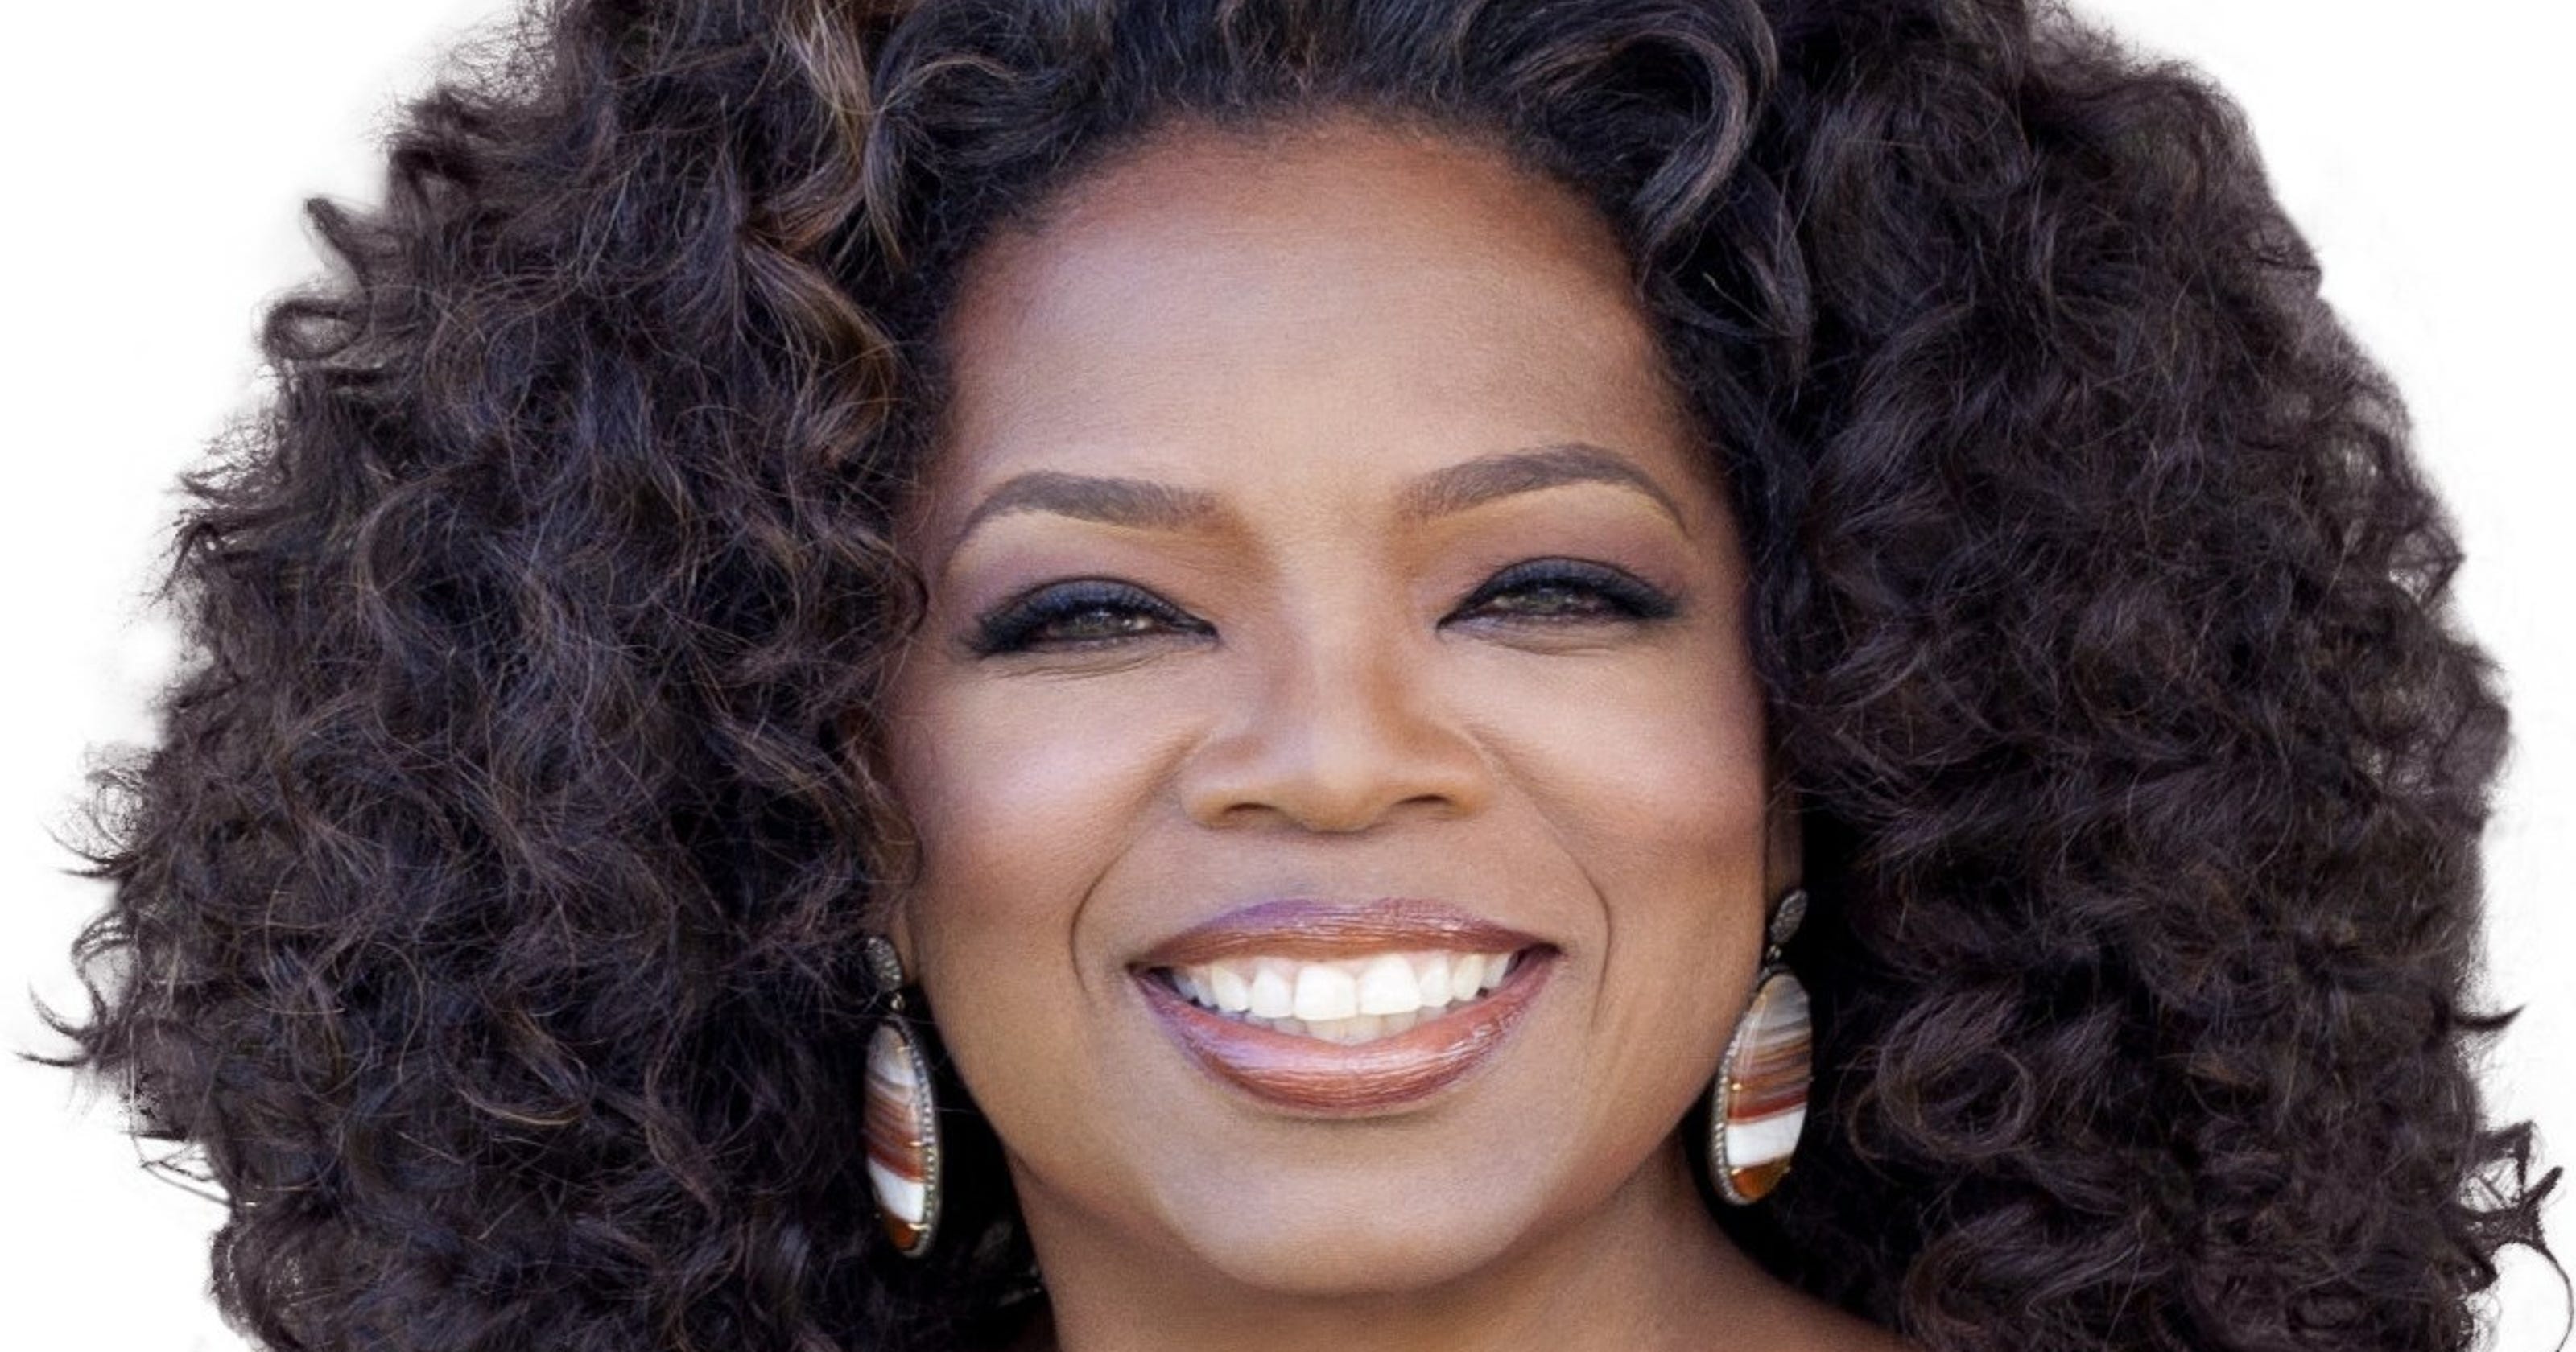 Oprah makes $70M in one day from Weight Watchers deal3200 x 1680